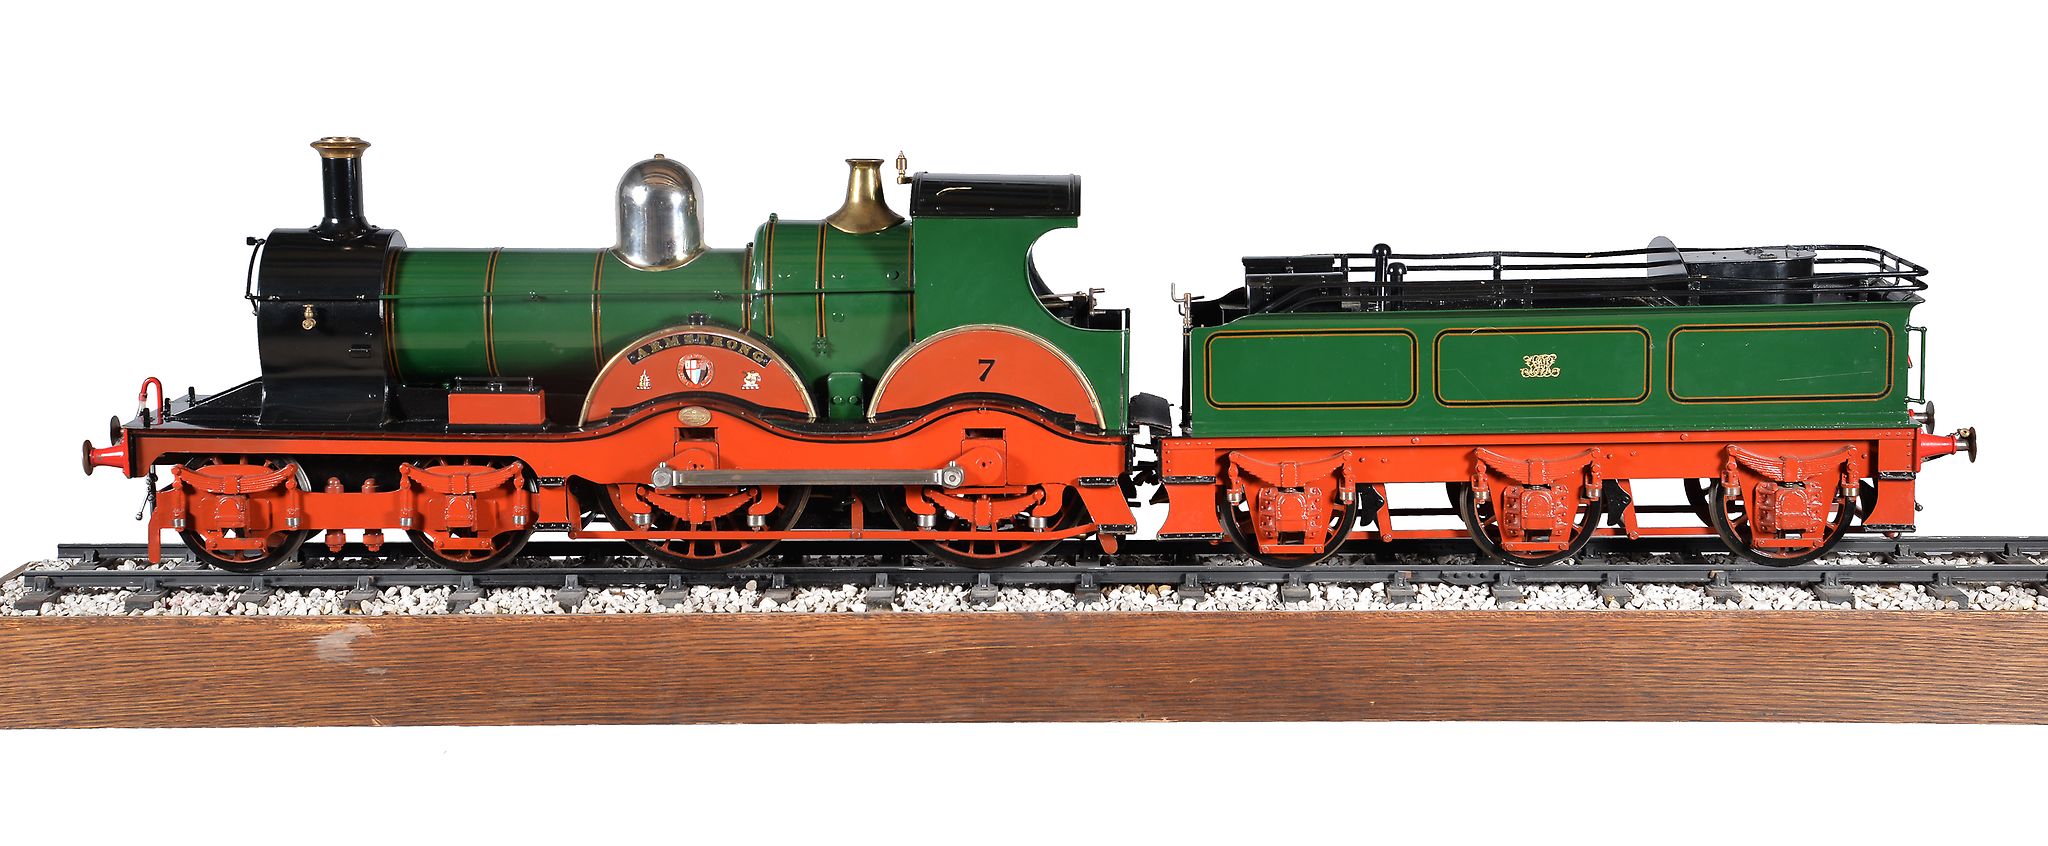 A fine exhibition quality 5 inch gauge model of a 4-4-0 Great Western Railway Armstrong No 7 tender